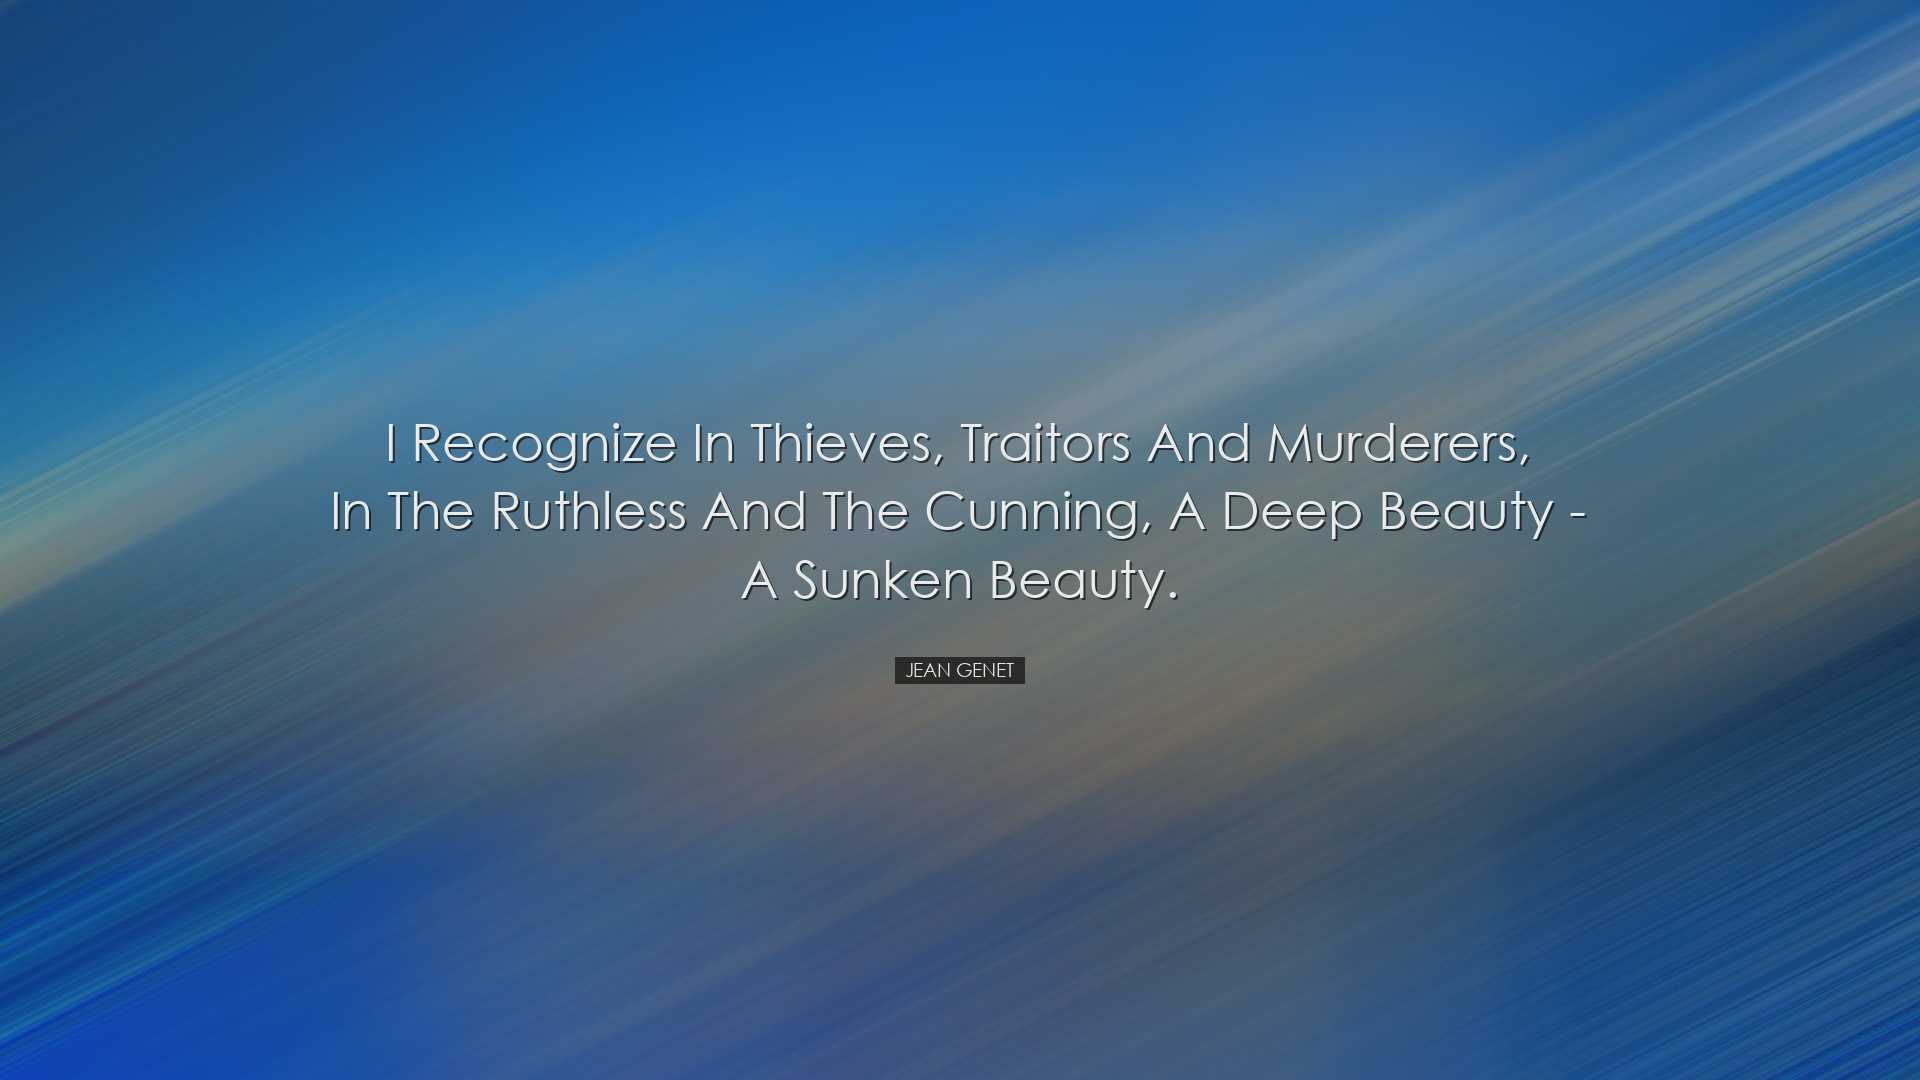 I recognize in thieves, traitors and murderers, in the ruthless an